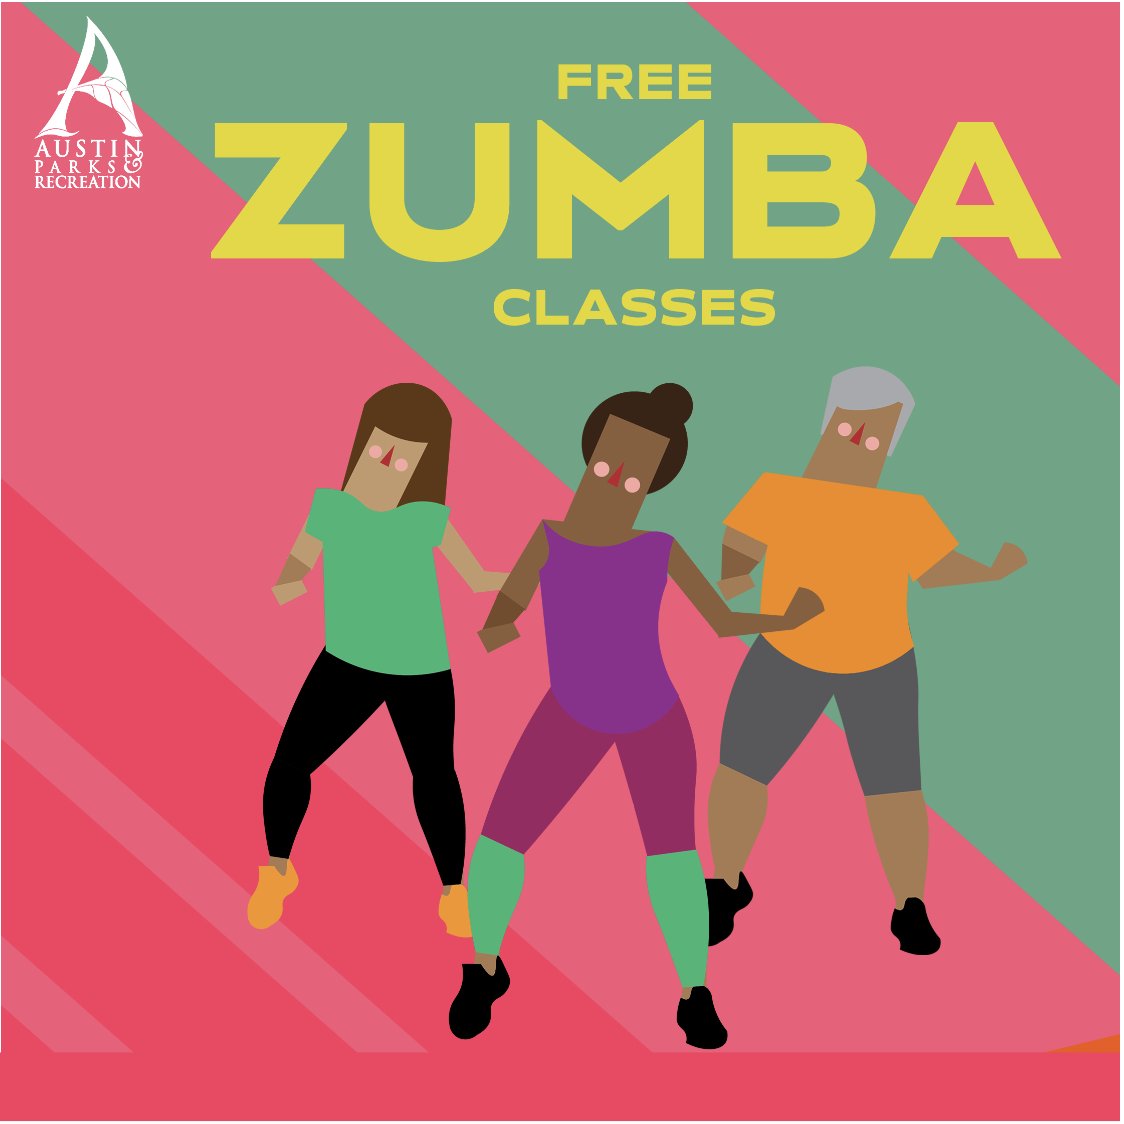 Free Zumba class 10am SATURDAY May 11 at the Conley Pavilion, Boggy Creek Greenbelt Trail, 1114 Nile St, Austin.